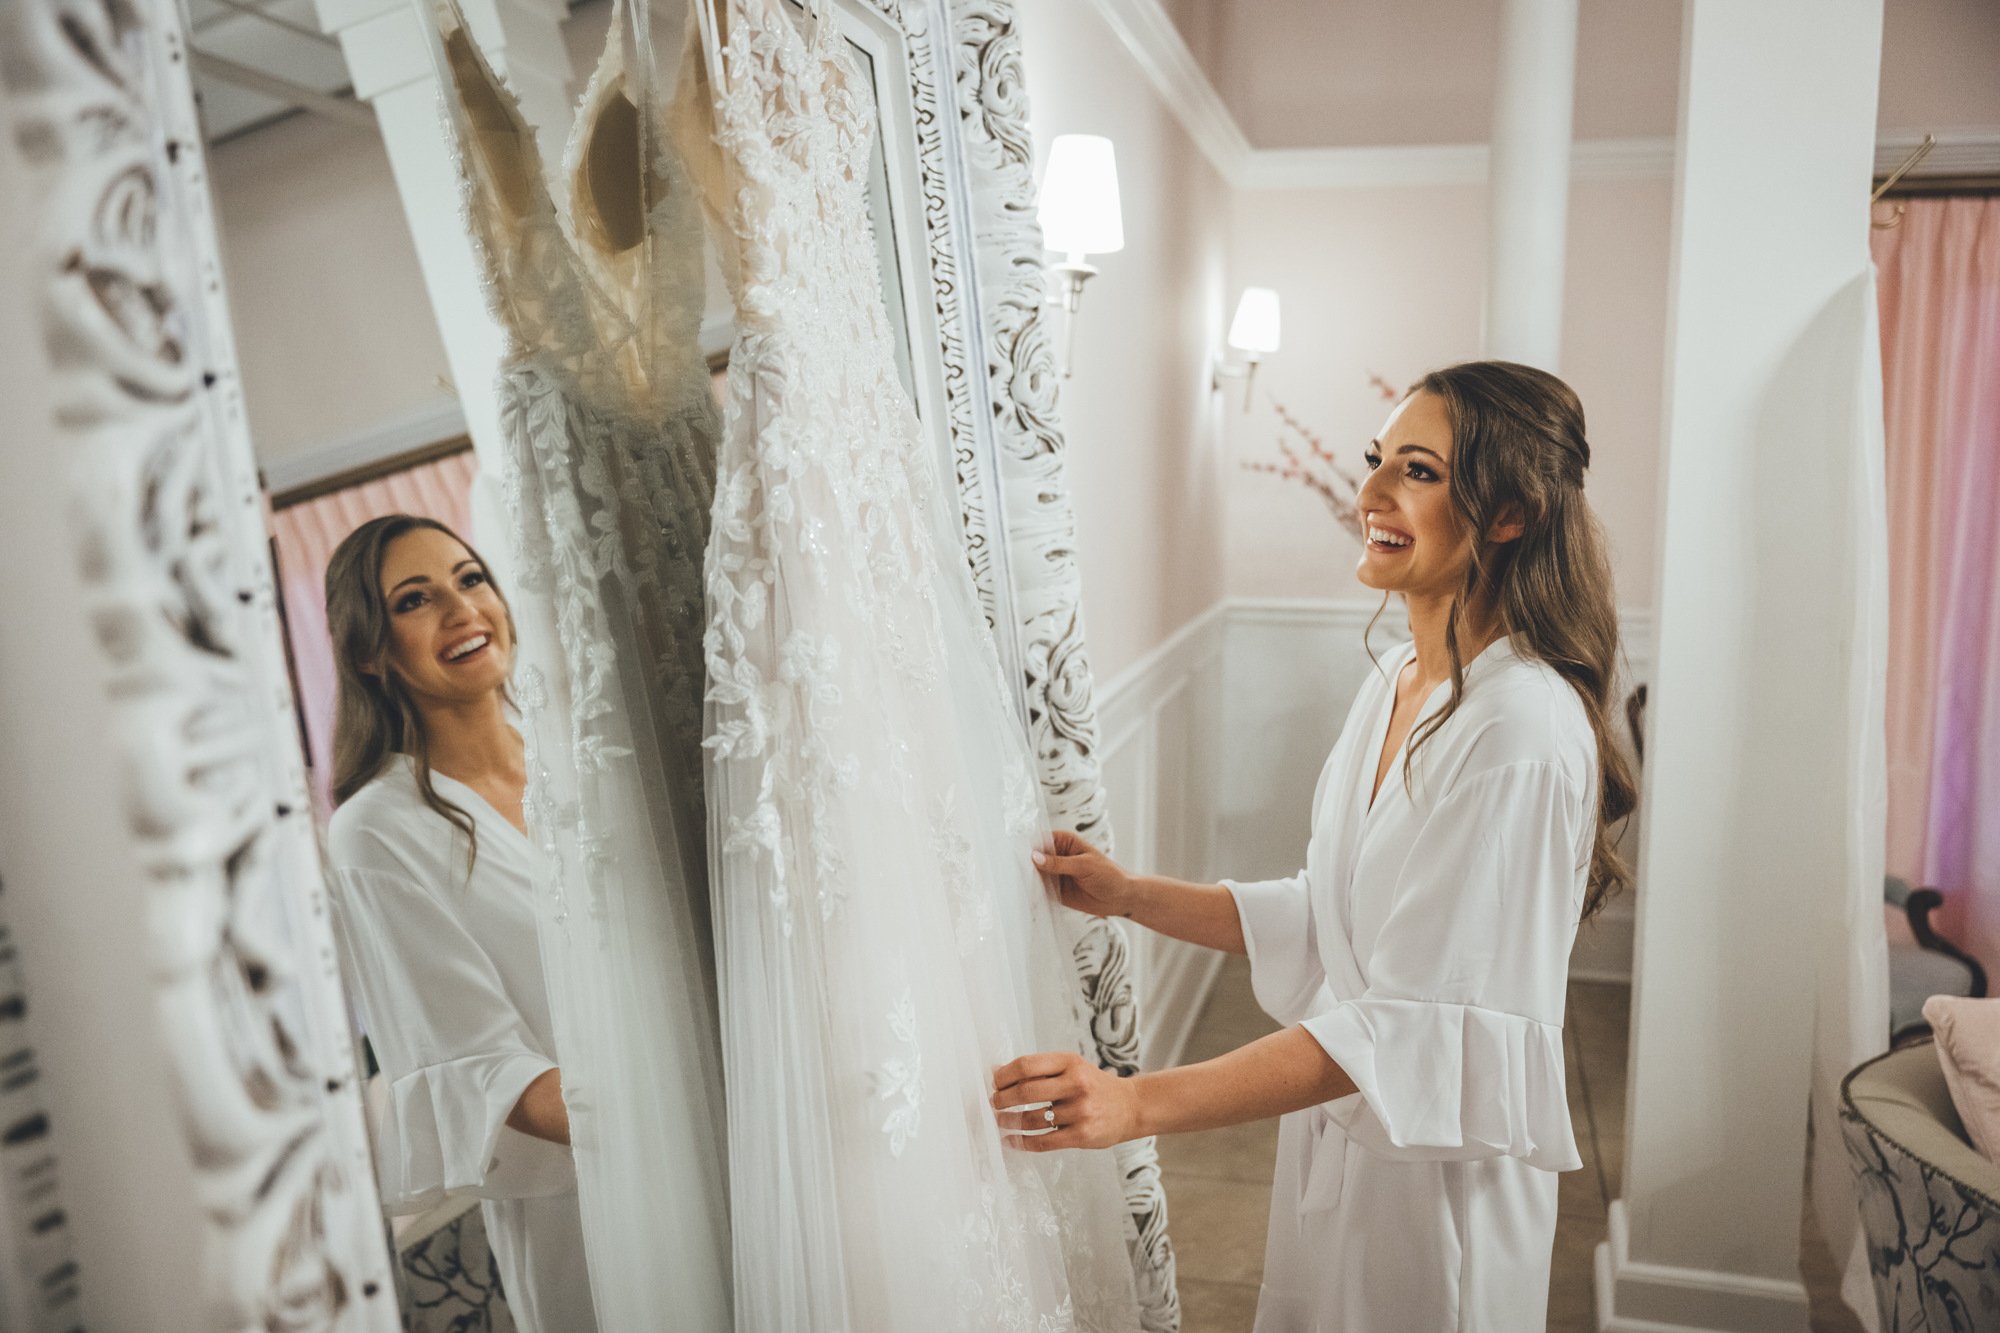 Bow Tie Photo & Video bride admiring her wedding dress at The White Room in St. Augustine, Florida.jpg